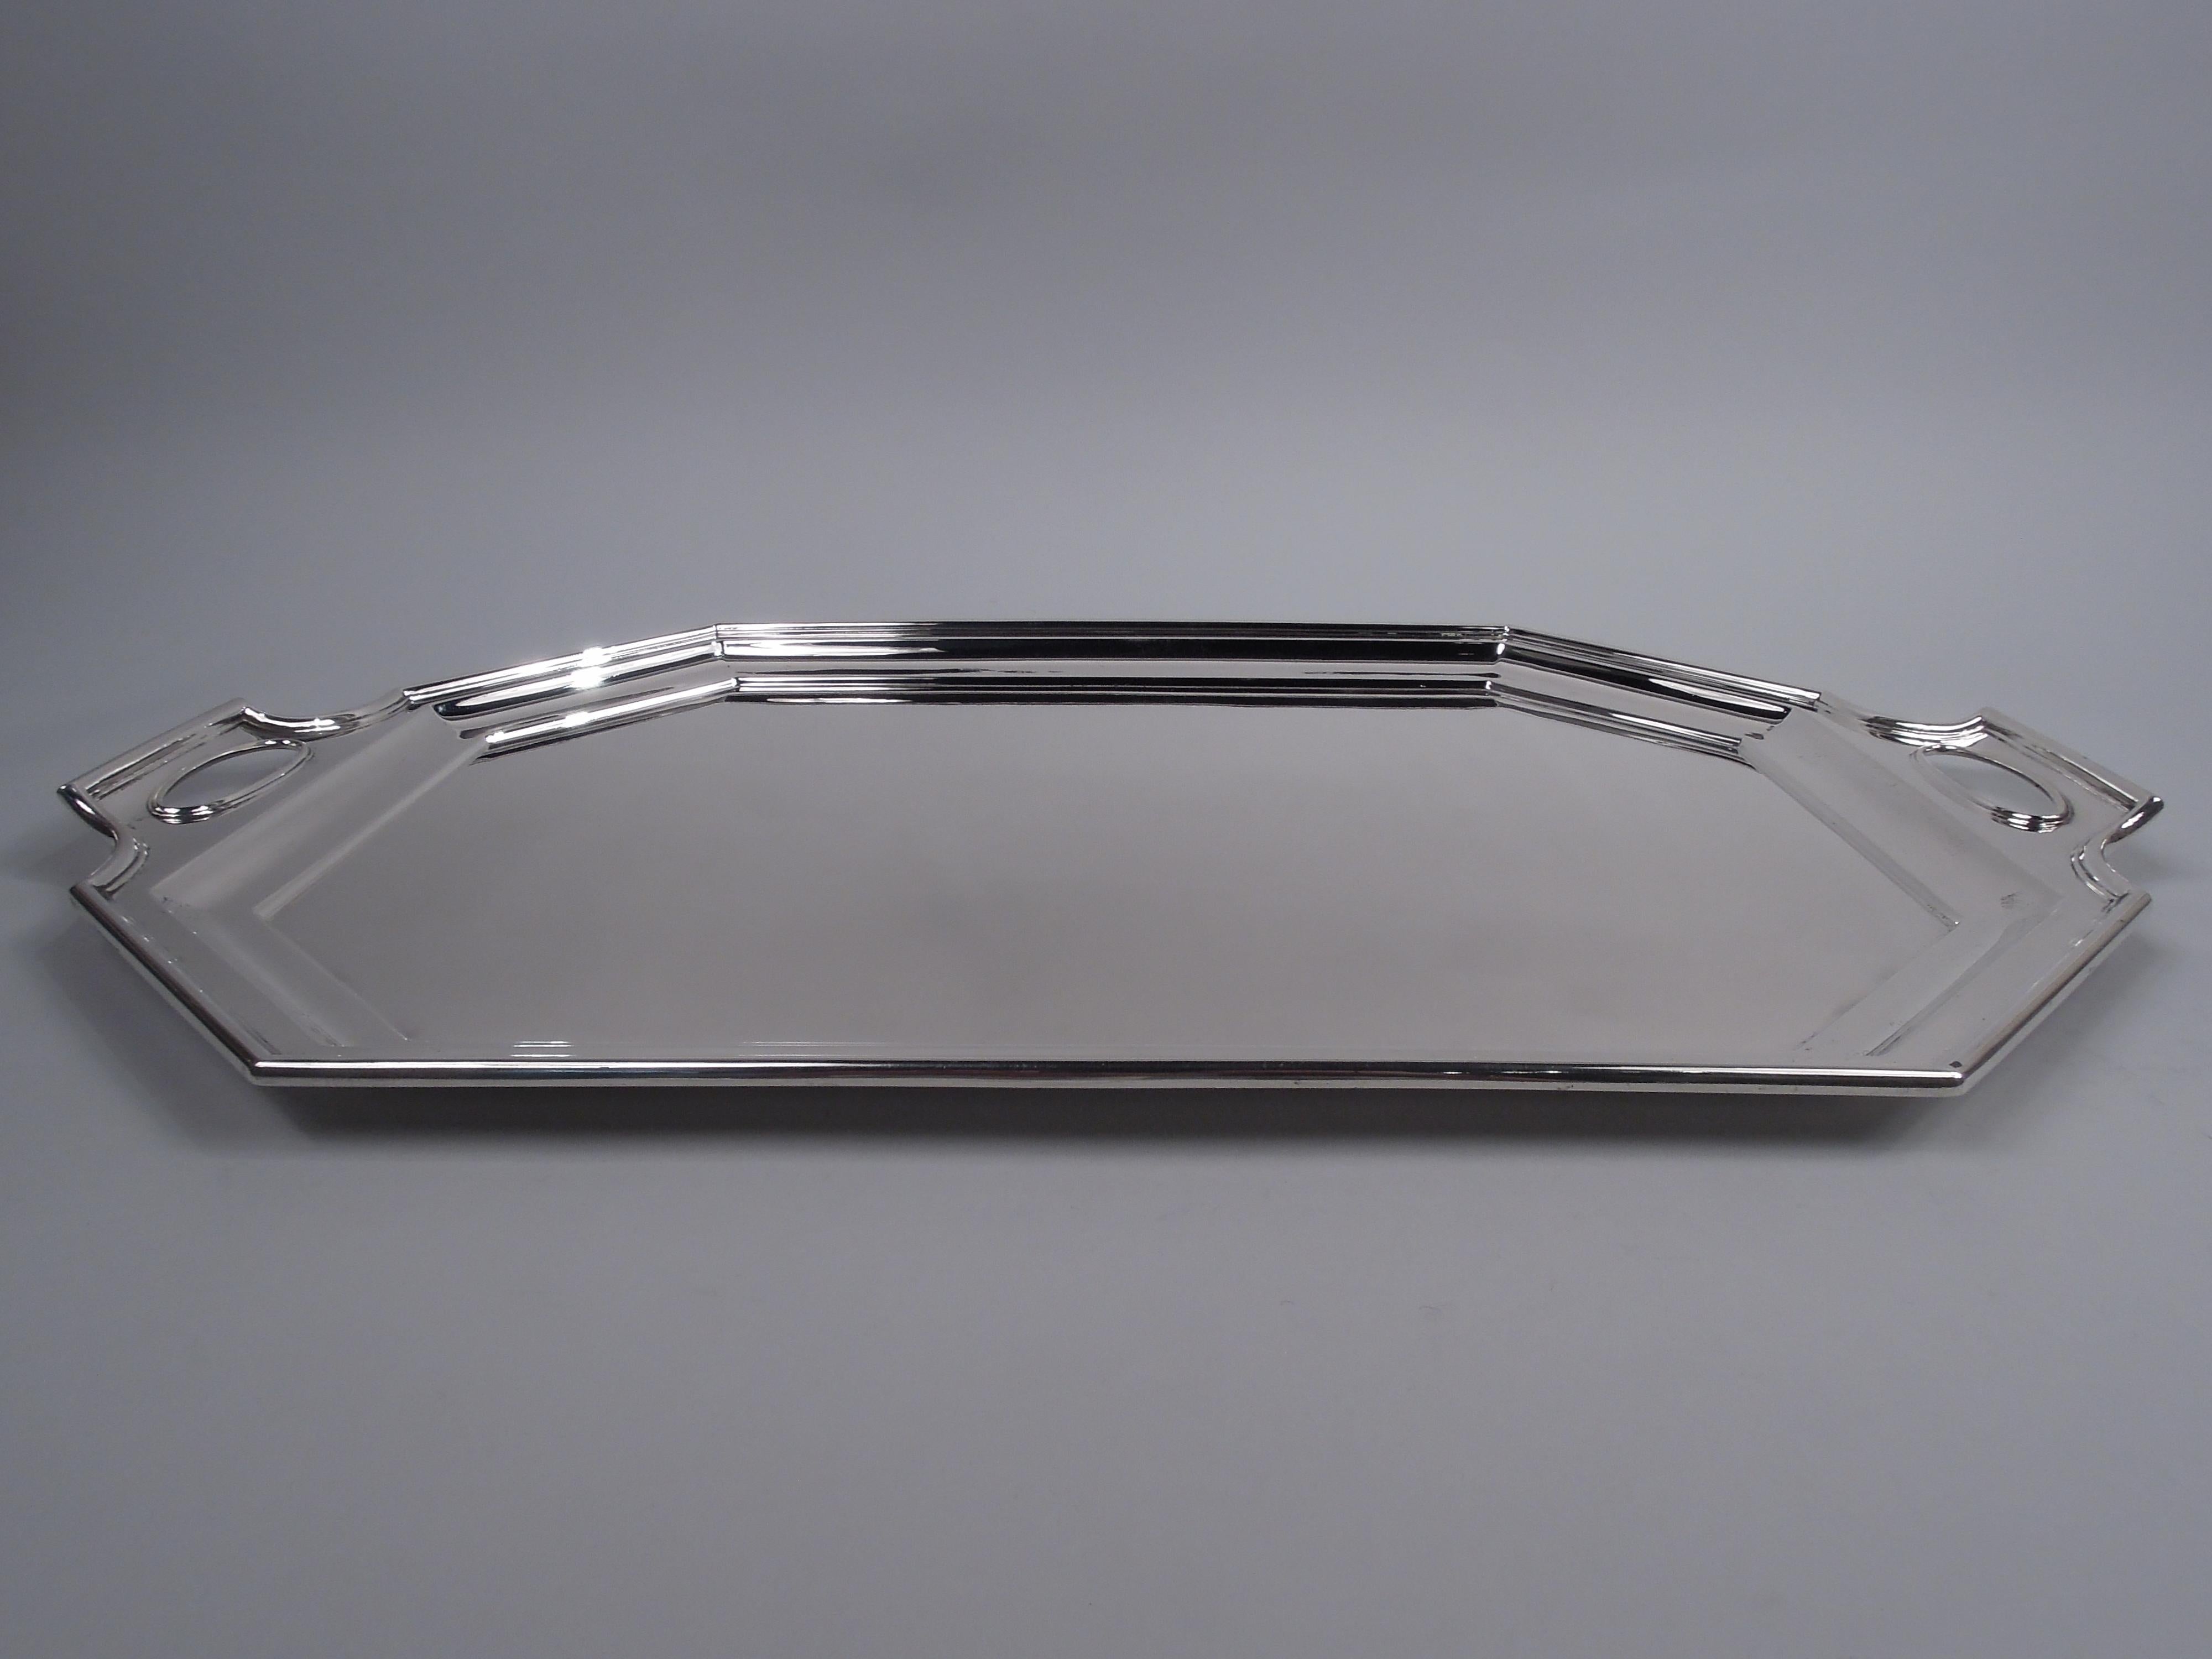 Fairfax sterling silver tea tray, ca 1920. Retailed by Black, Starr & Frost in New York. Rectilinear with chamfered corners and shaped ends with cutout oval handles. A beautiful piece in the Art Deco pattern that was made by Gorham and Durgin. Marks